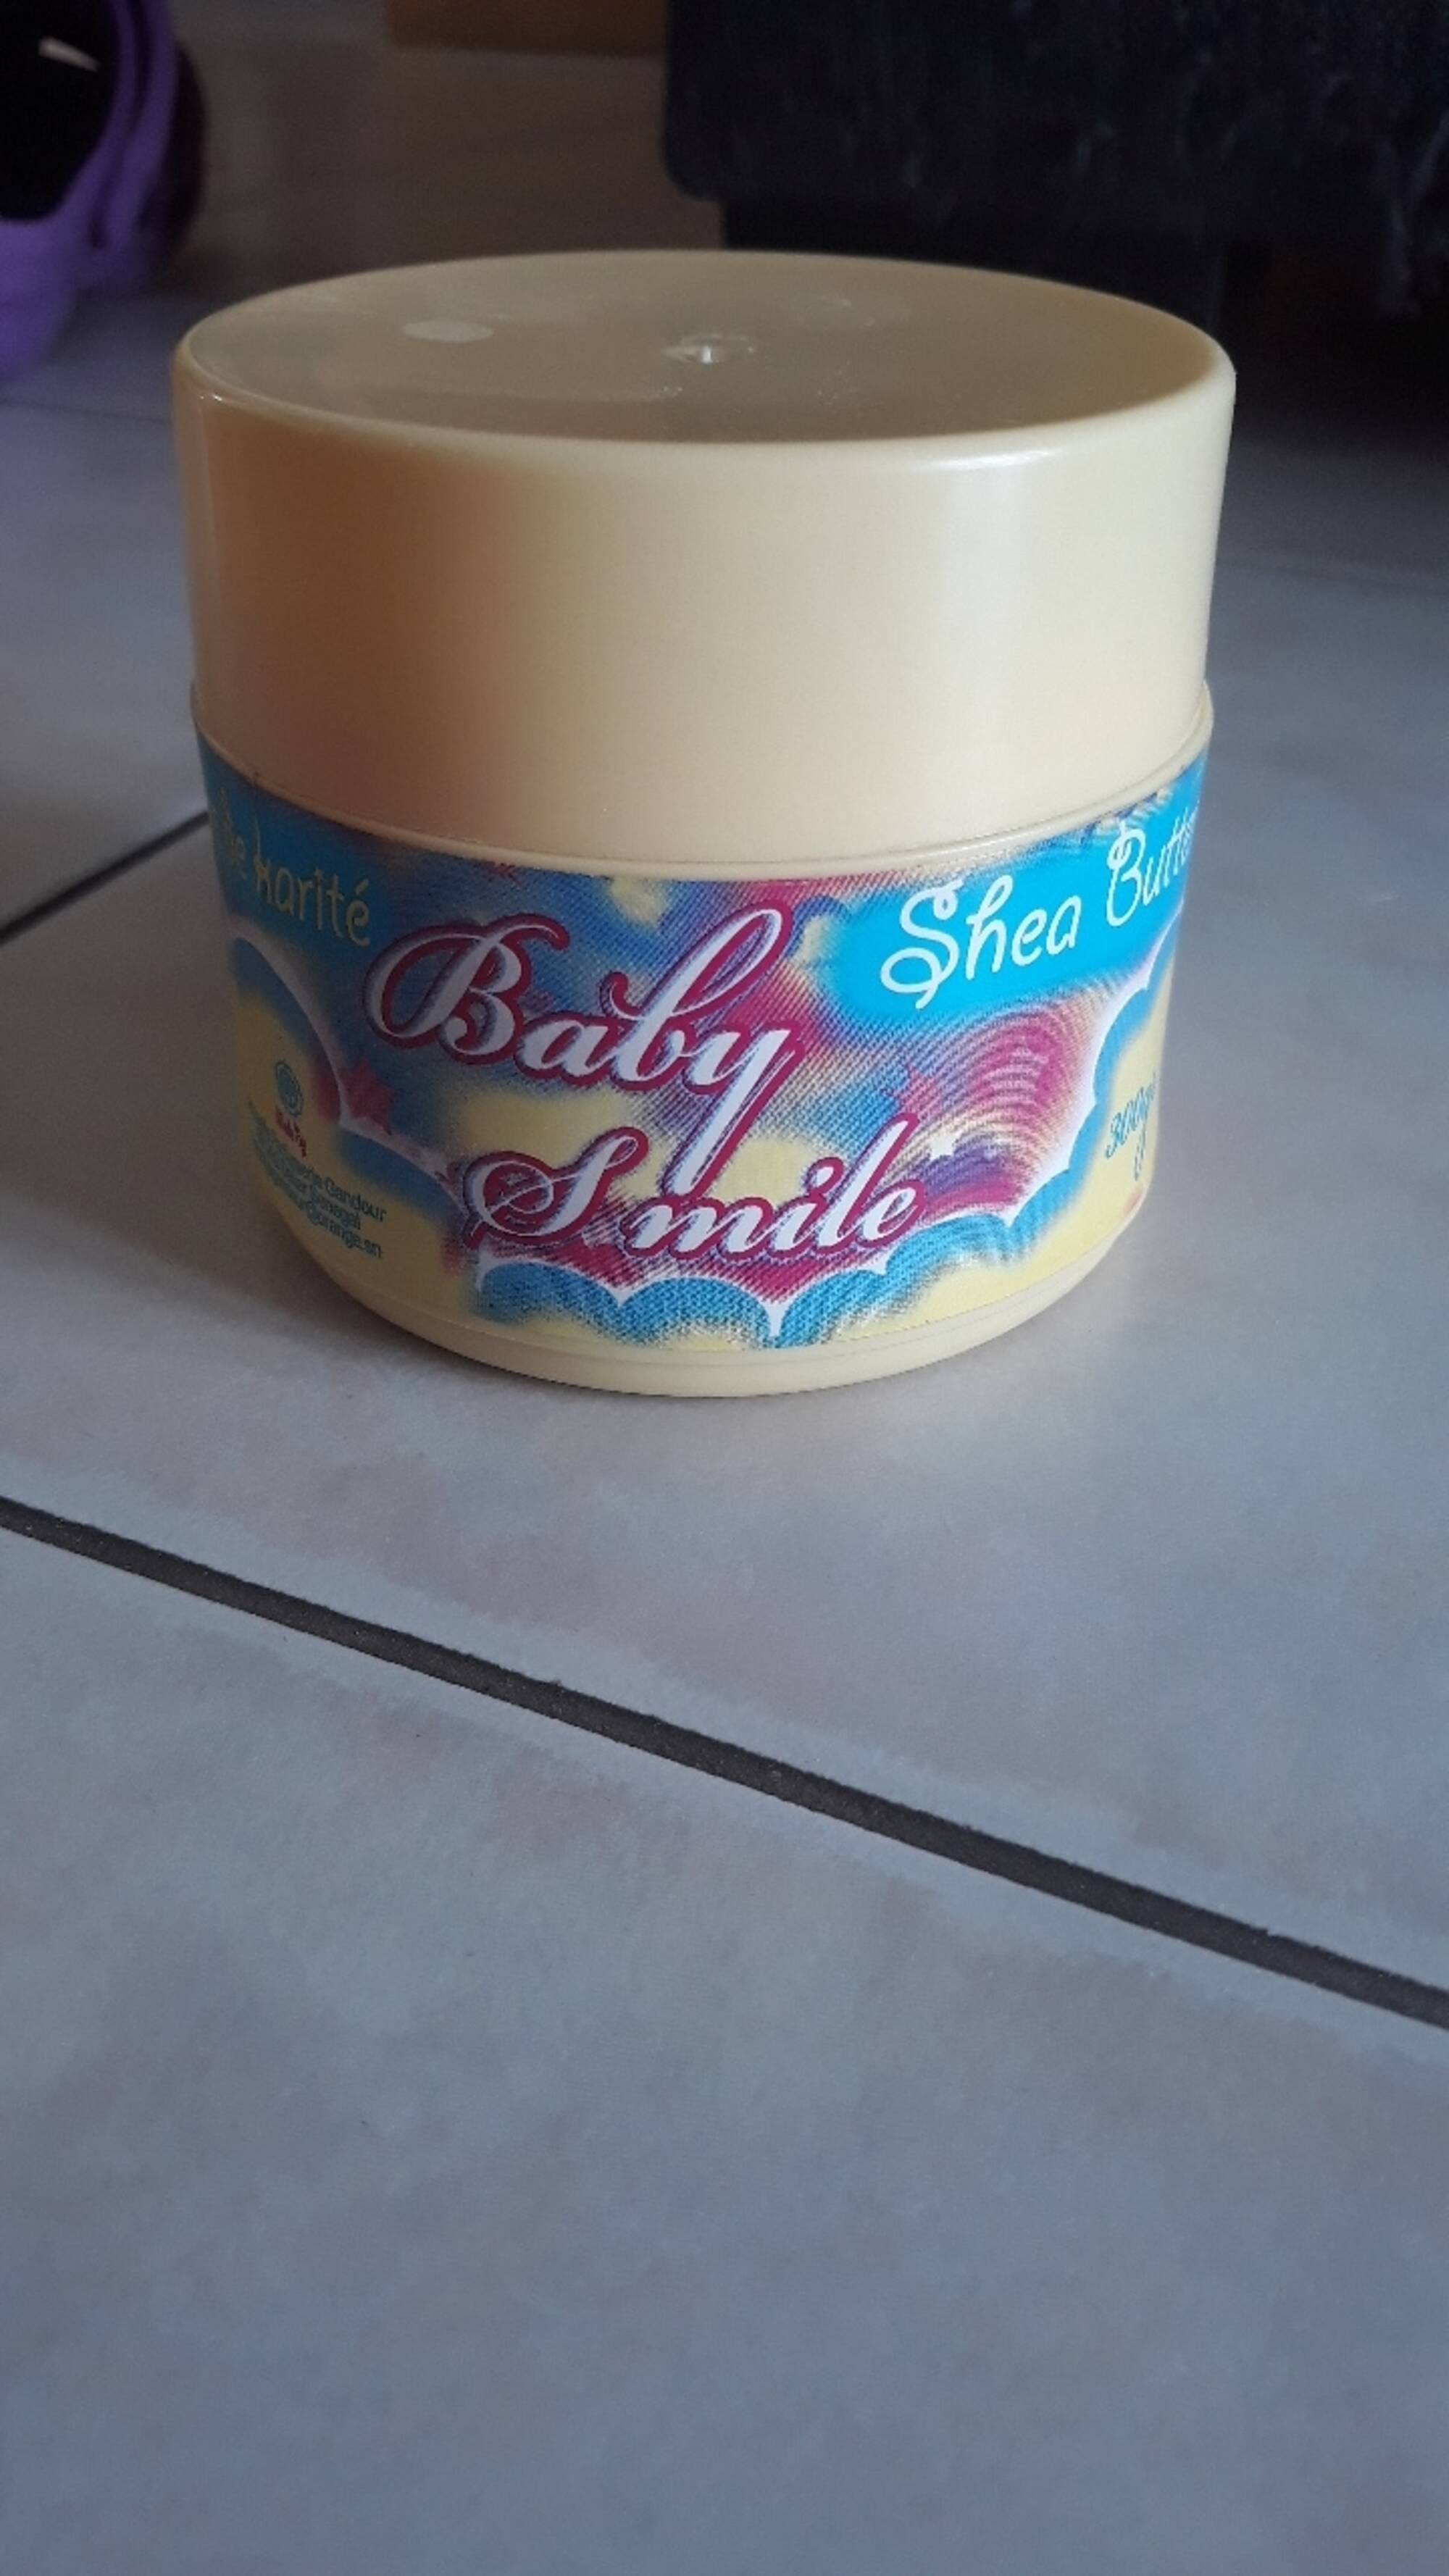 BABY SMILE - Shea butter